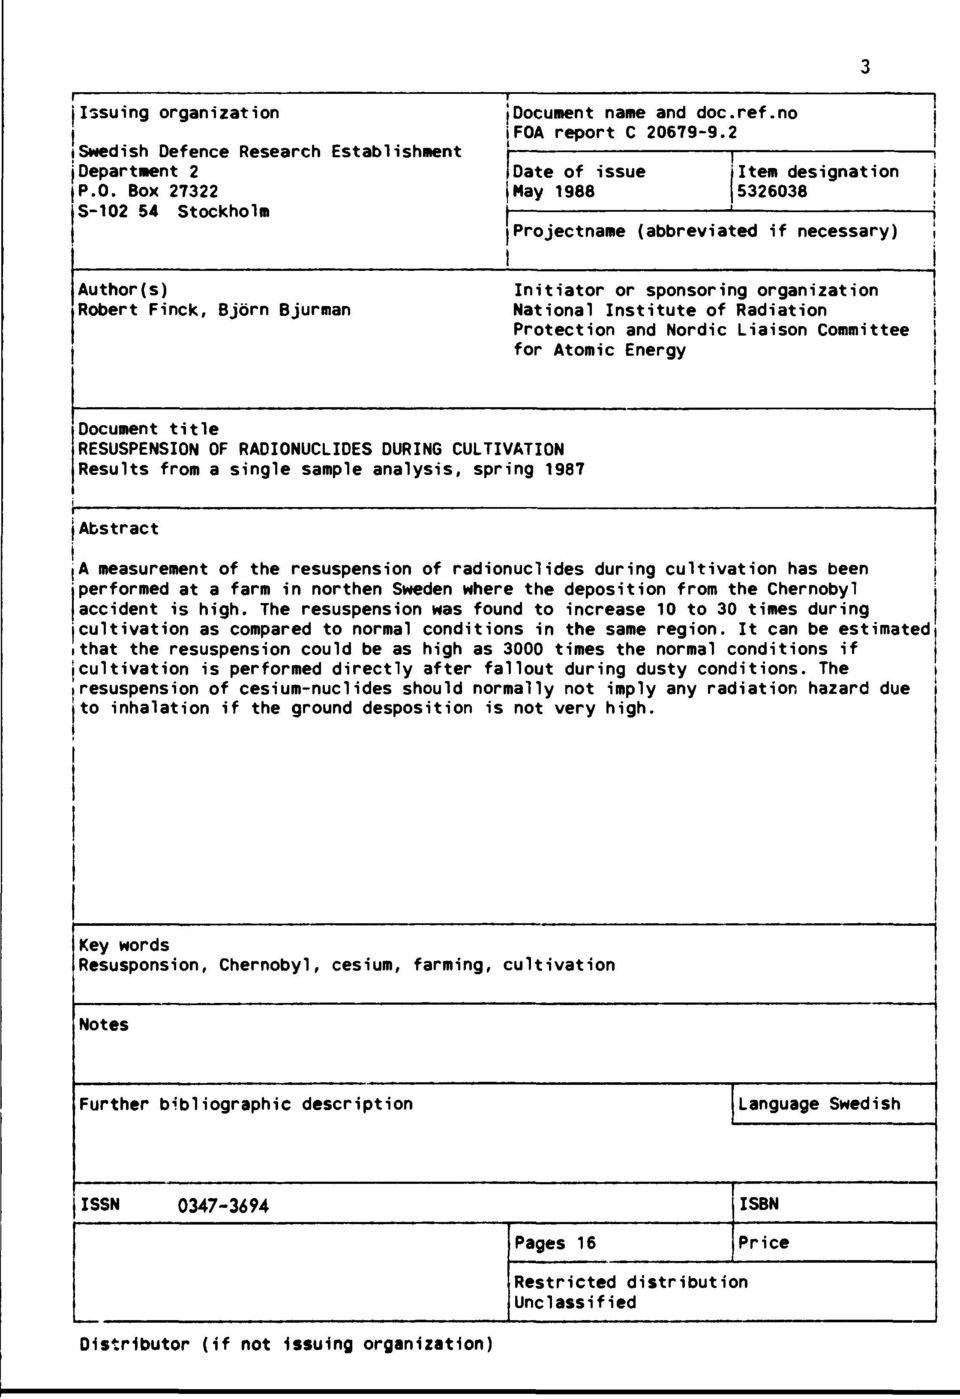 2 Date of issue May 1988 Item designation 5326038 Projectname (abbreviated if necessary) Initiator or sponsoring organization National Institute of Radiation Protection and Nordic Liaison Committee